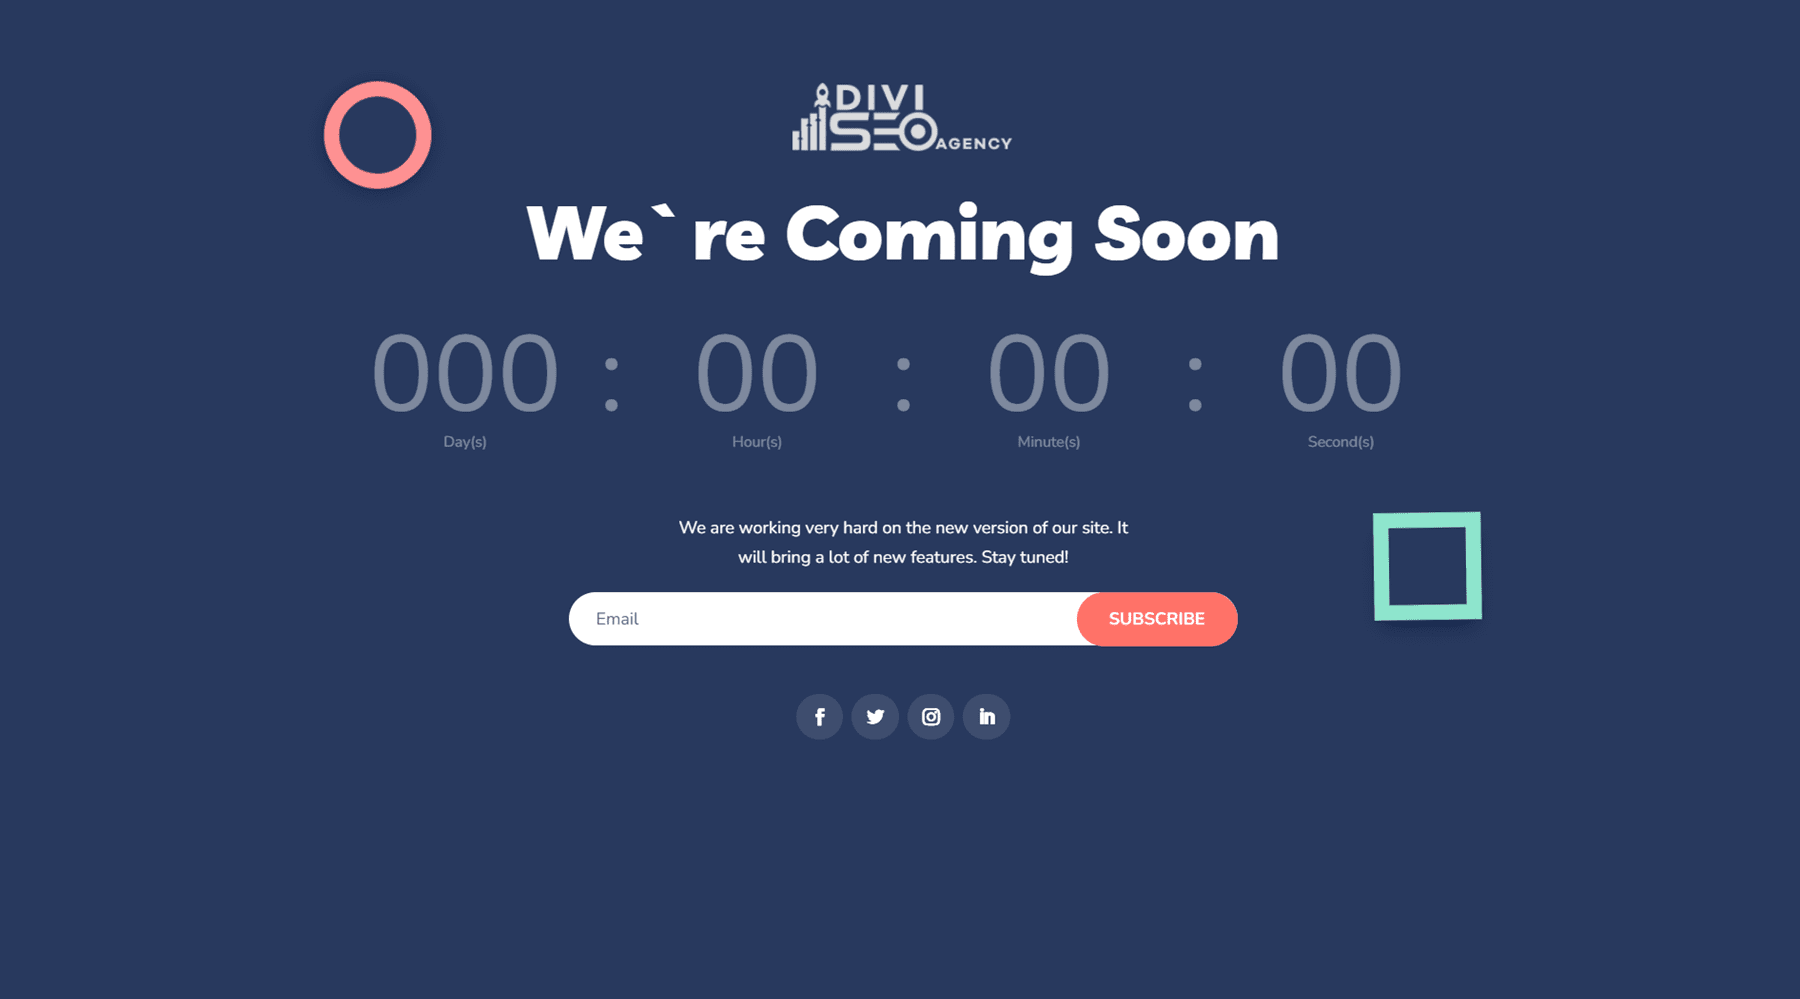 Divi SEO Agency Theme Divi Child Theme Overview Coming Soon